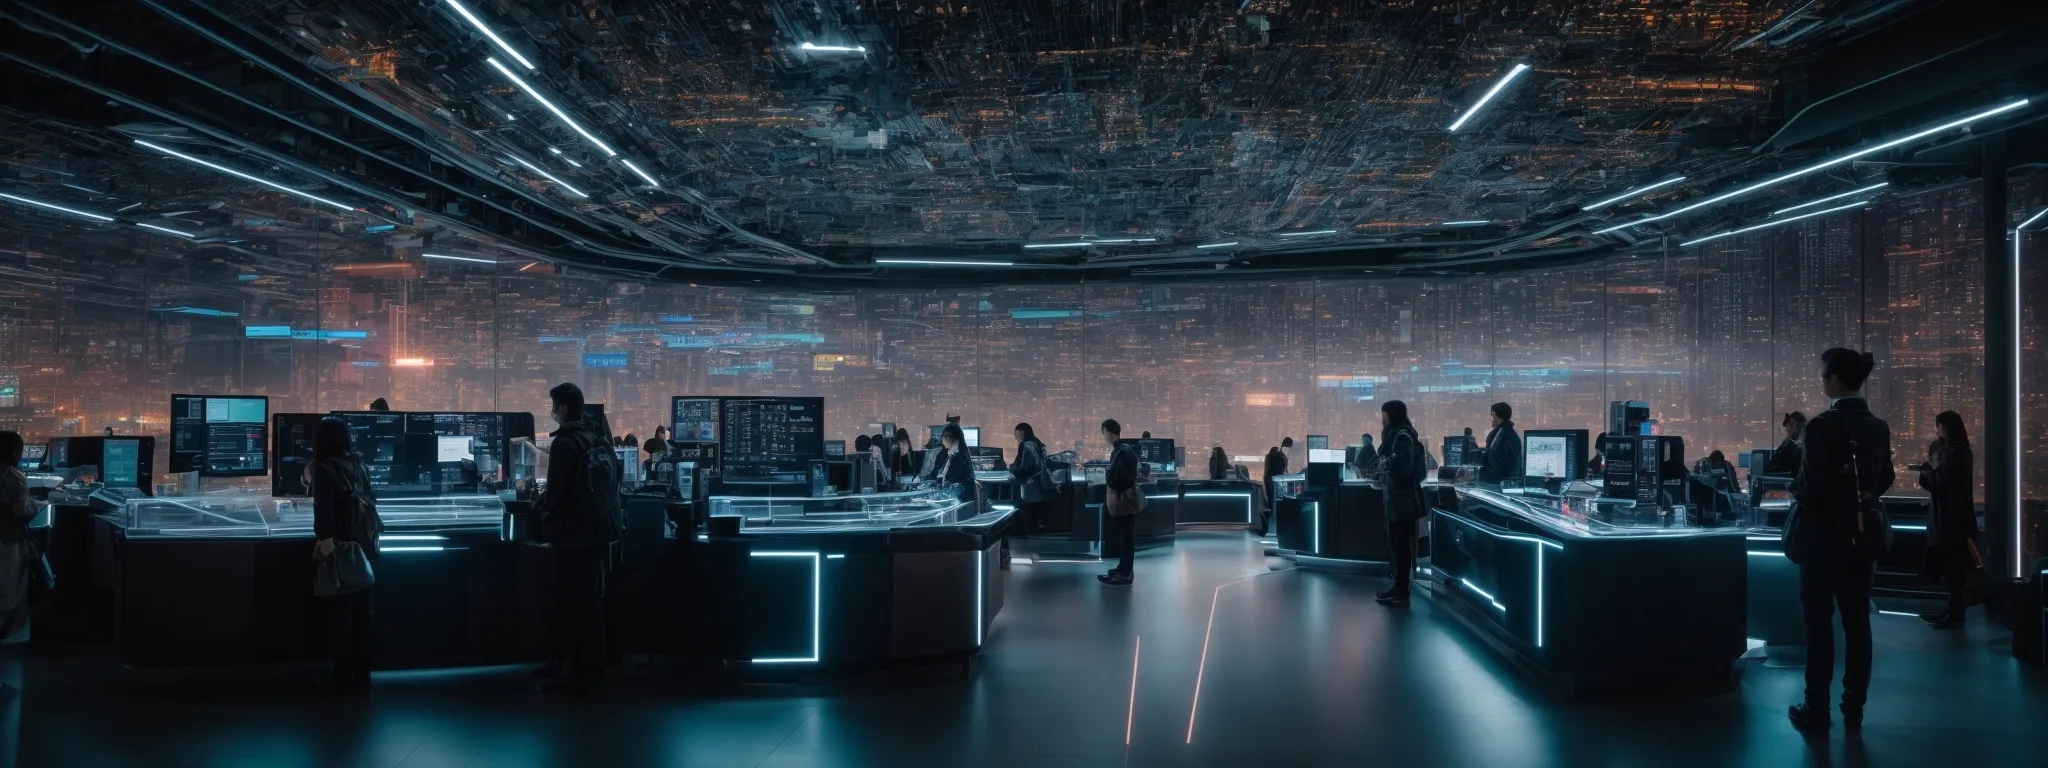 a futuristic ai hub bustling with interactive screens displaying flowing data and algorithmic patterns, symbolizing emma ai's relentless pursuit of knowledge.